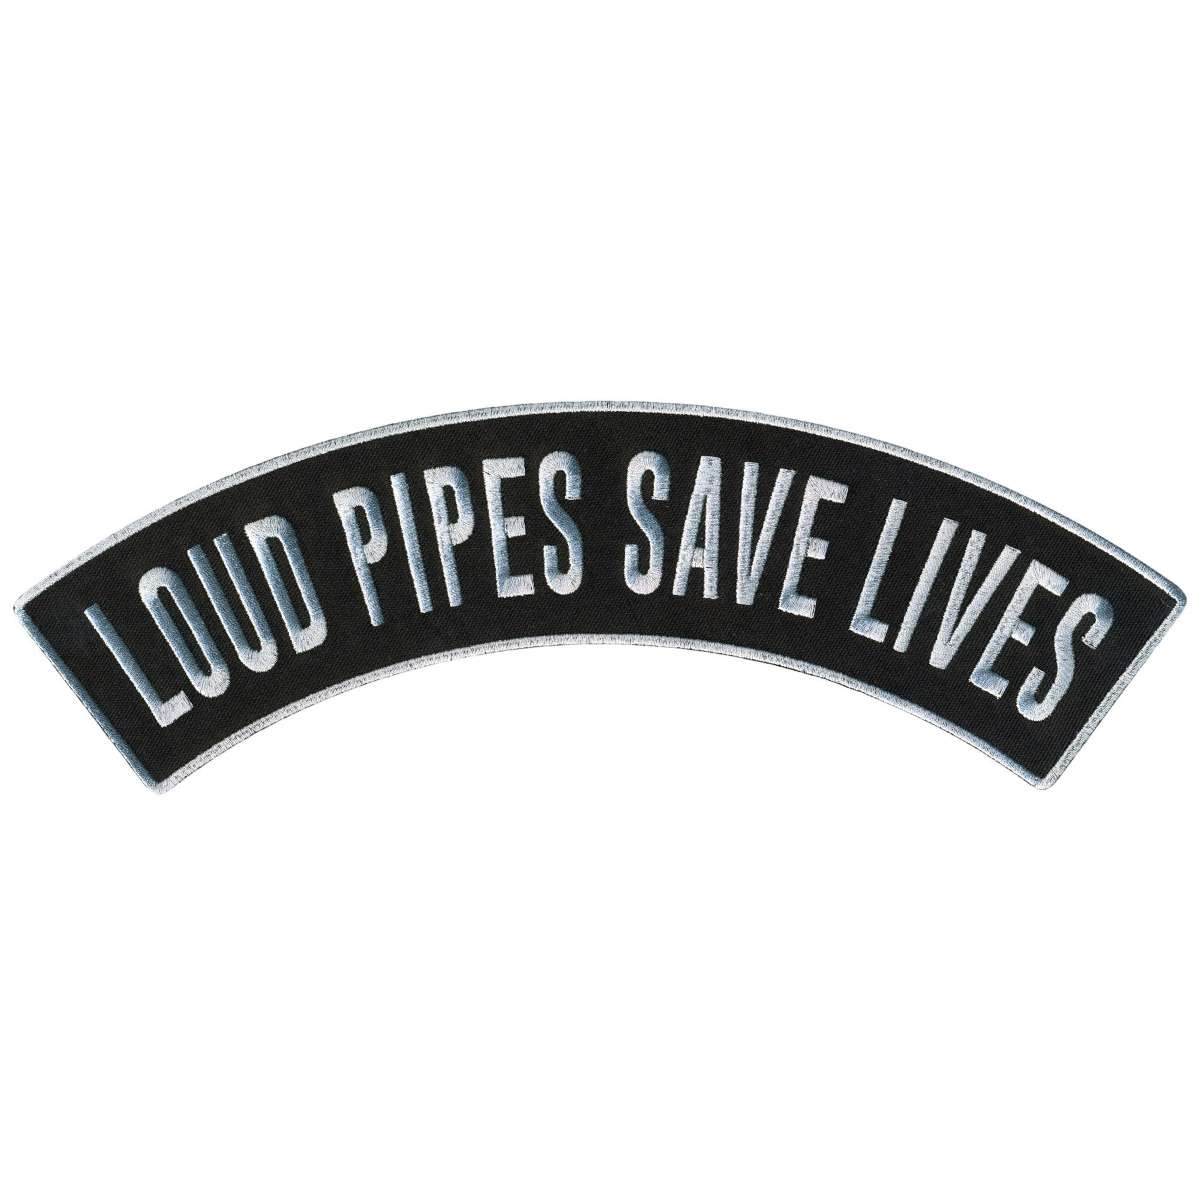 Hot Leathers Loud Pipes 12" X 3" Top Rocker Patch PPM4199